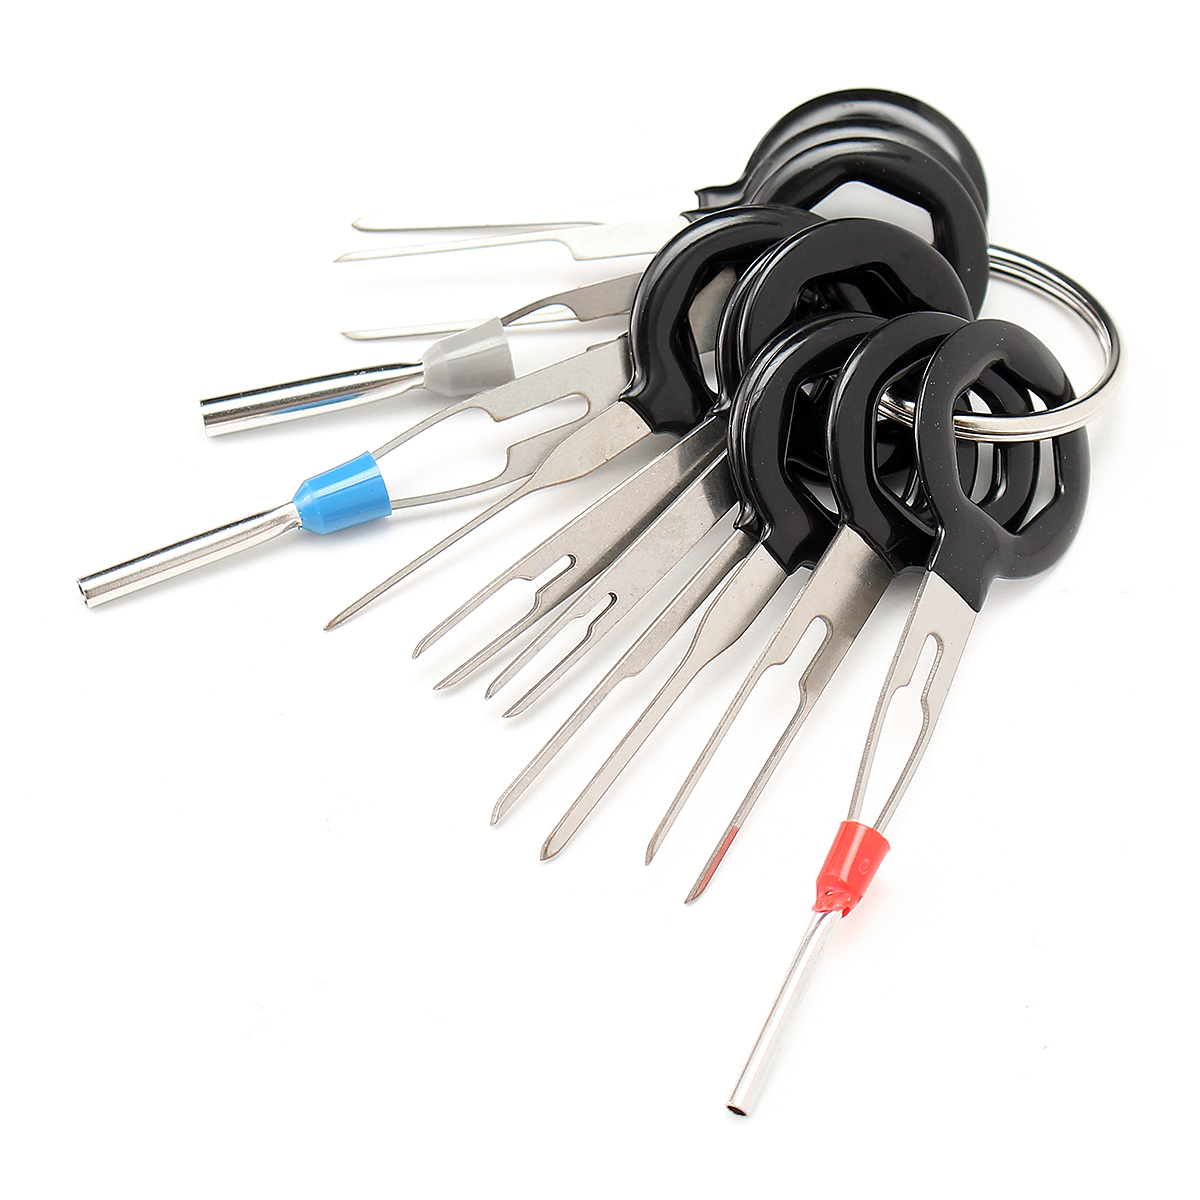 Excellwayreg-11Pcs-Terminal-Removal-Tool-Kit-Wiring-Connector-Pin-Release-Extractor-1179384-1